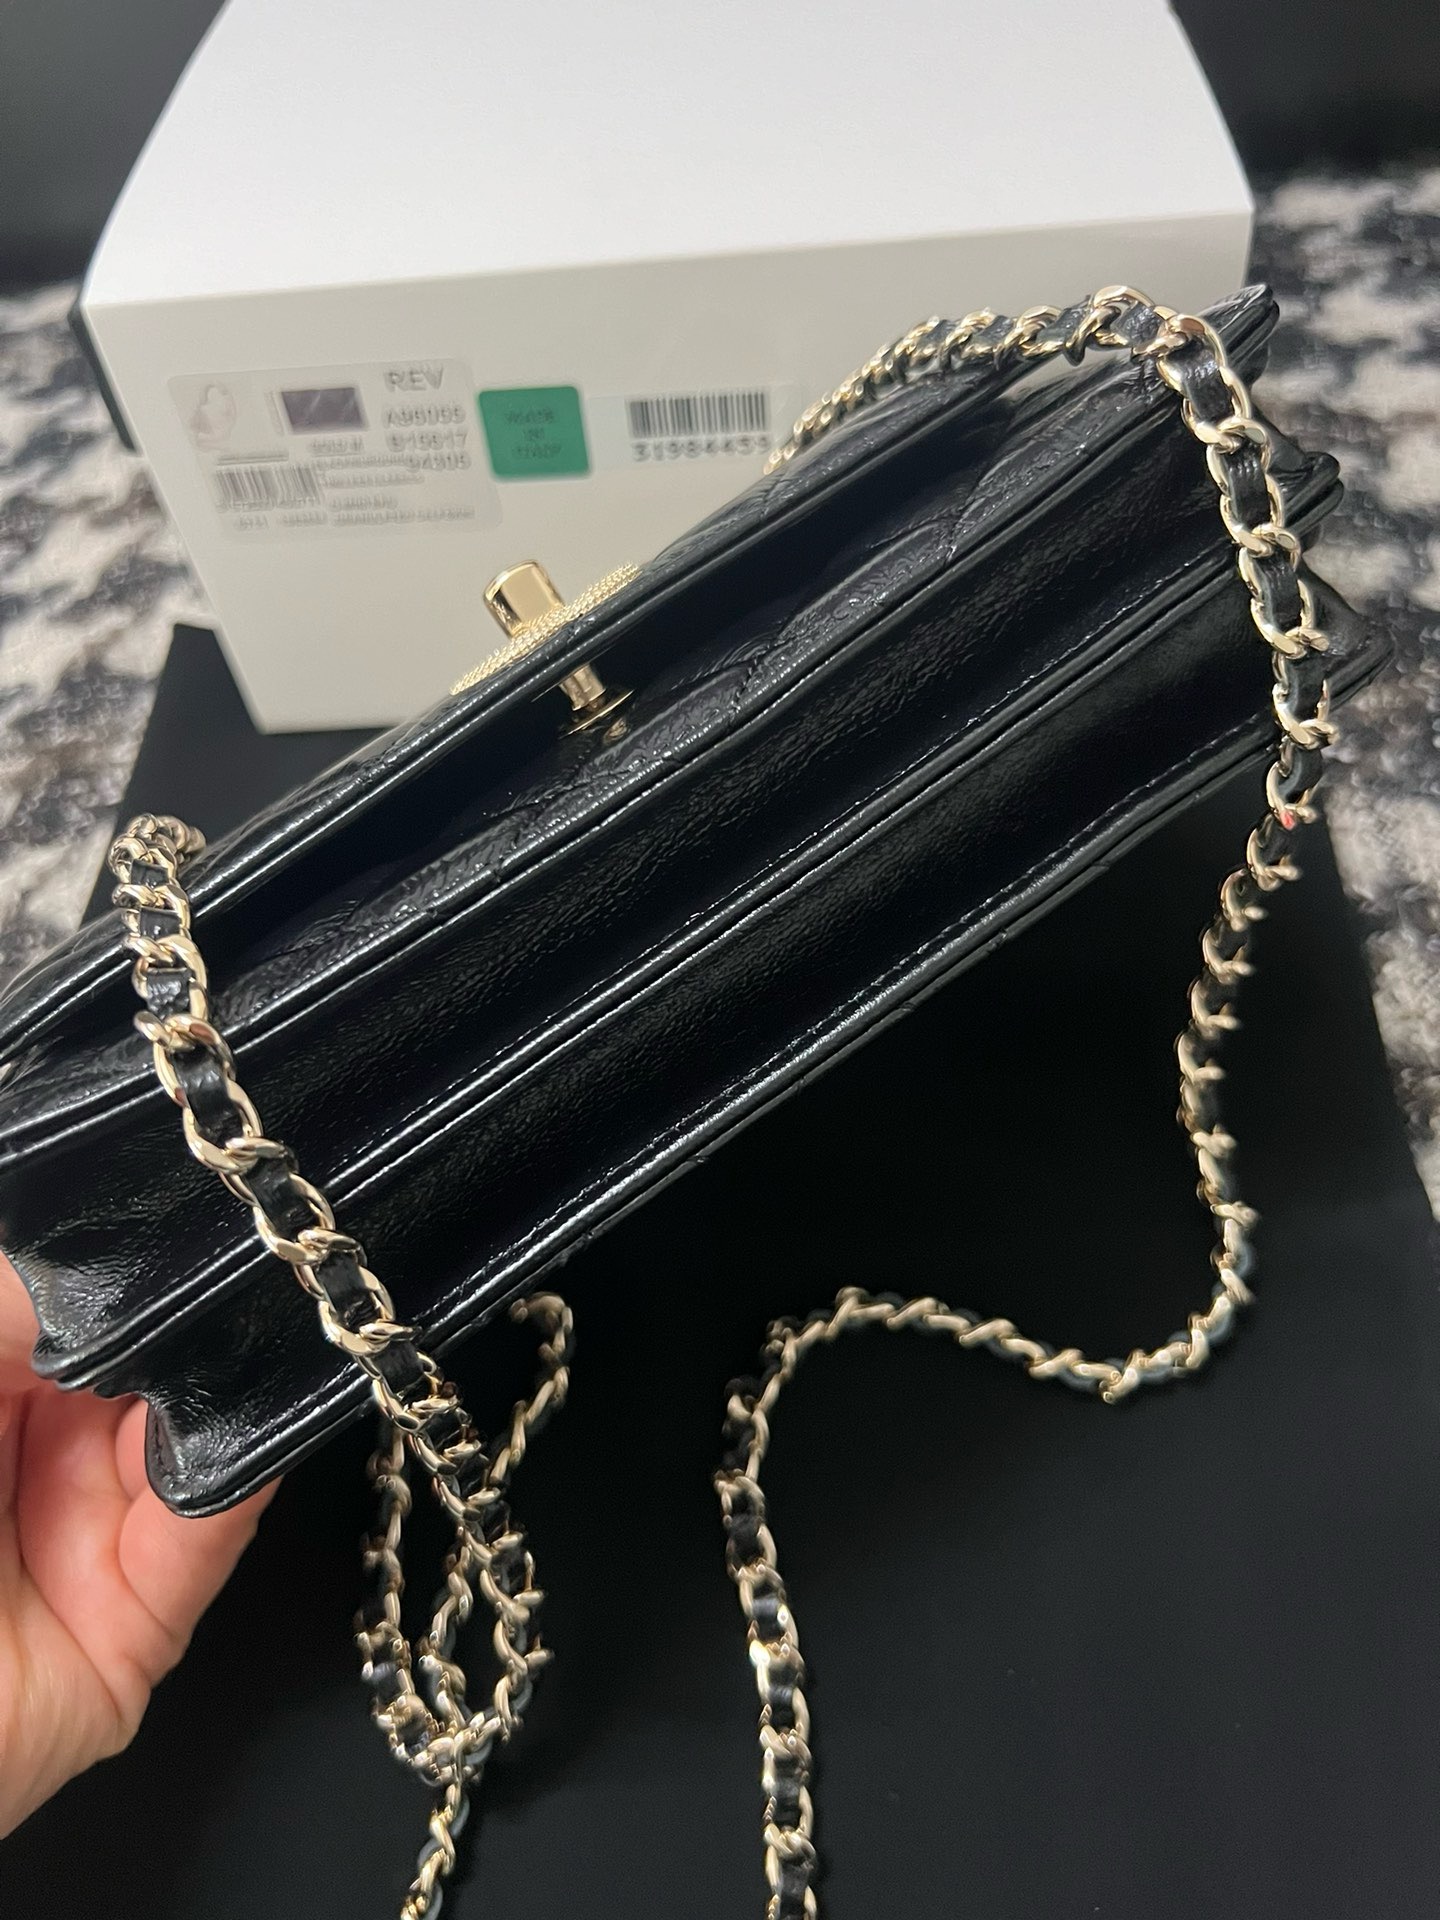 CHANEL FLAP PHONE HOLDER WITH CHAIN AD3566 black